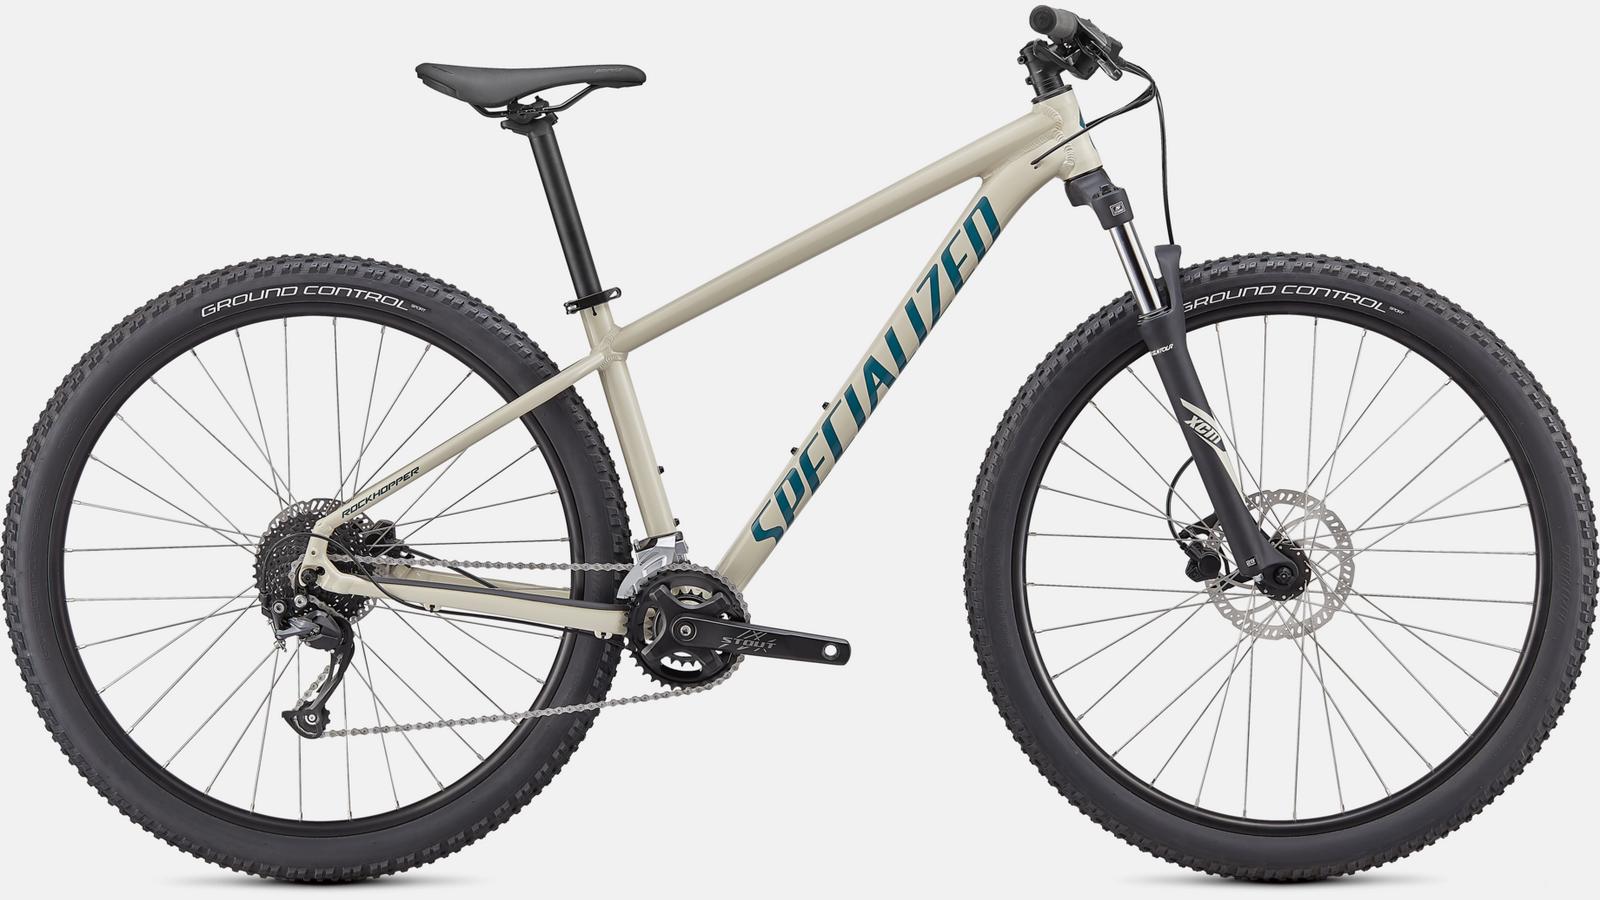 Paint for 2021 Specialized Rockhopper Sport 27.5 - Gloss White Mountains